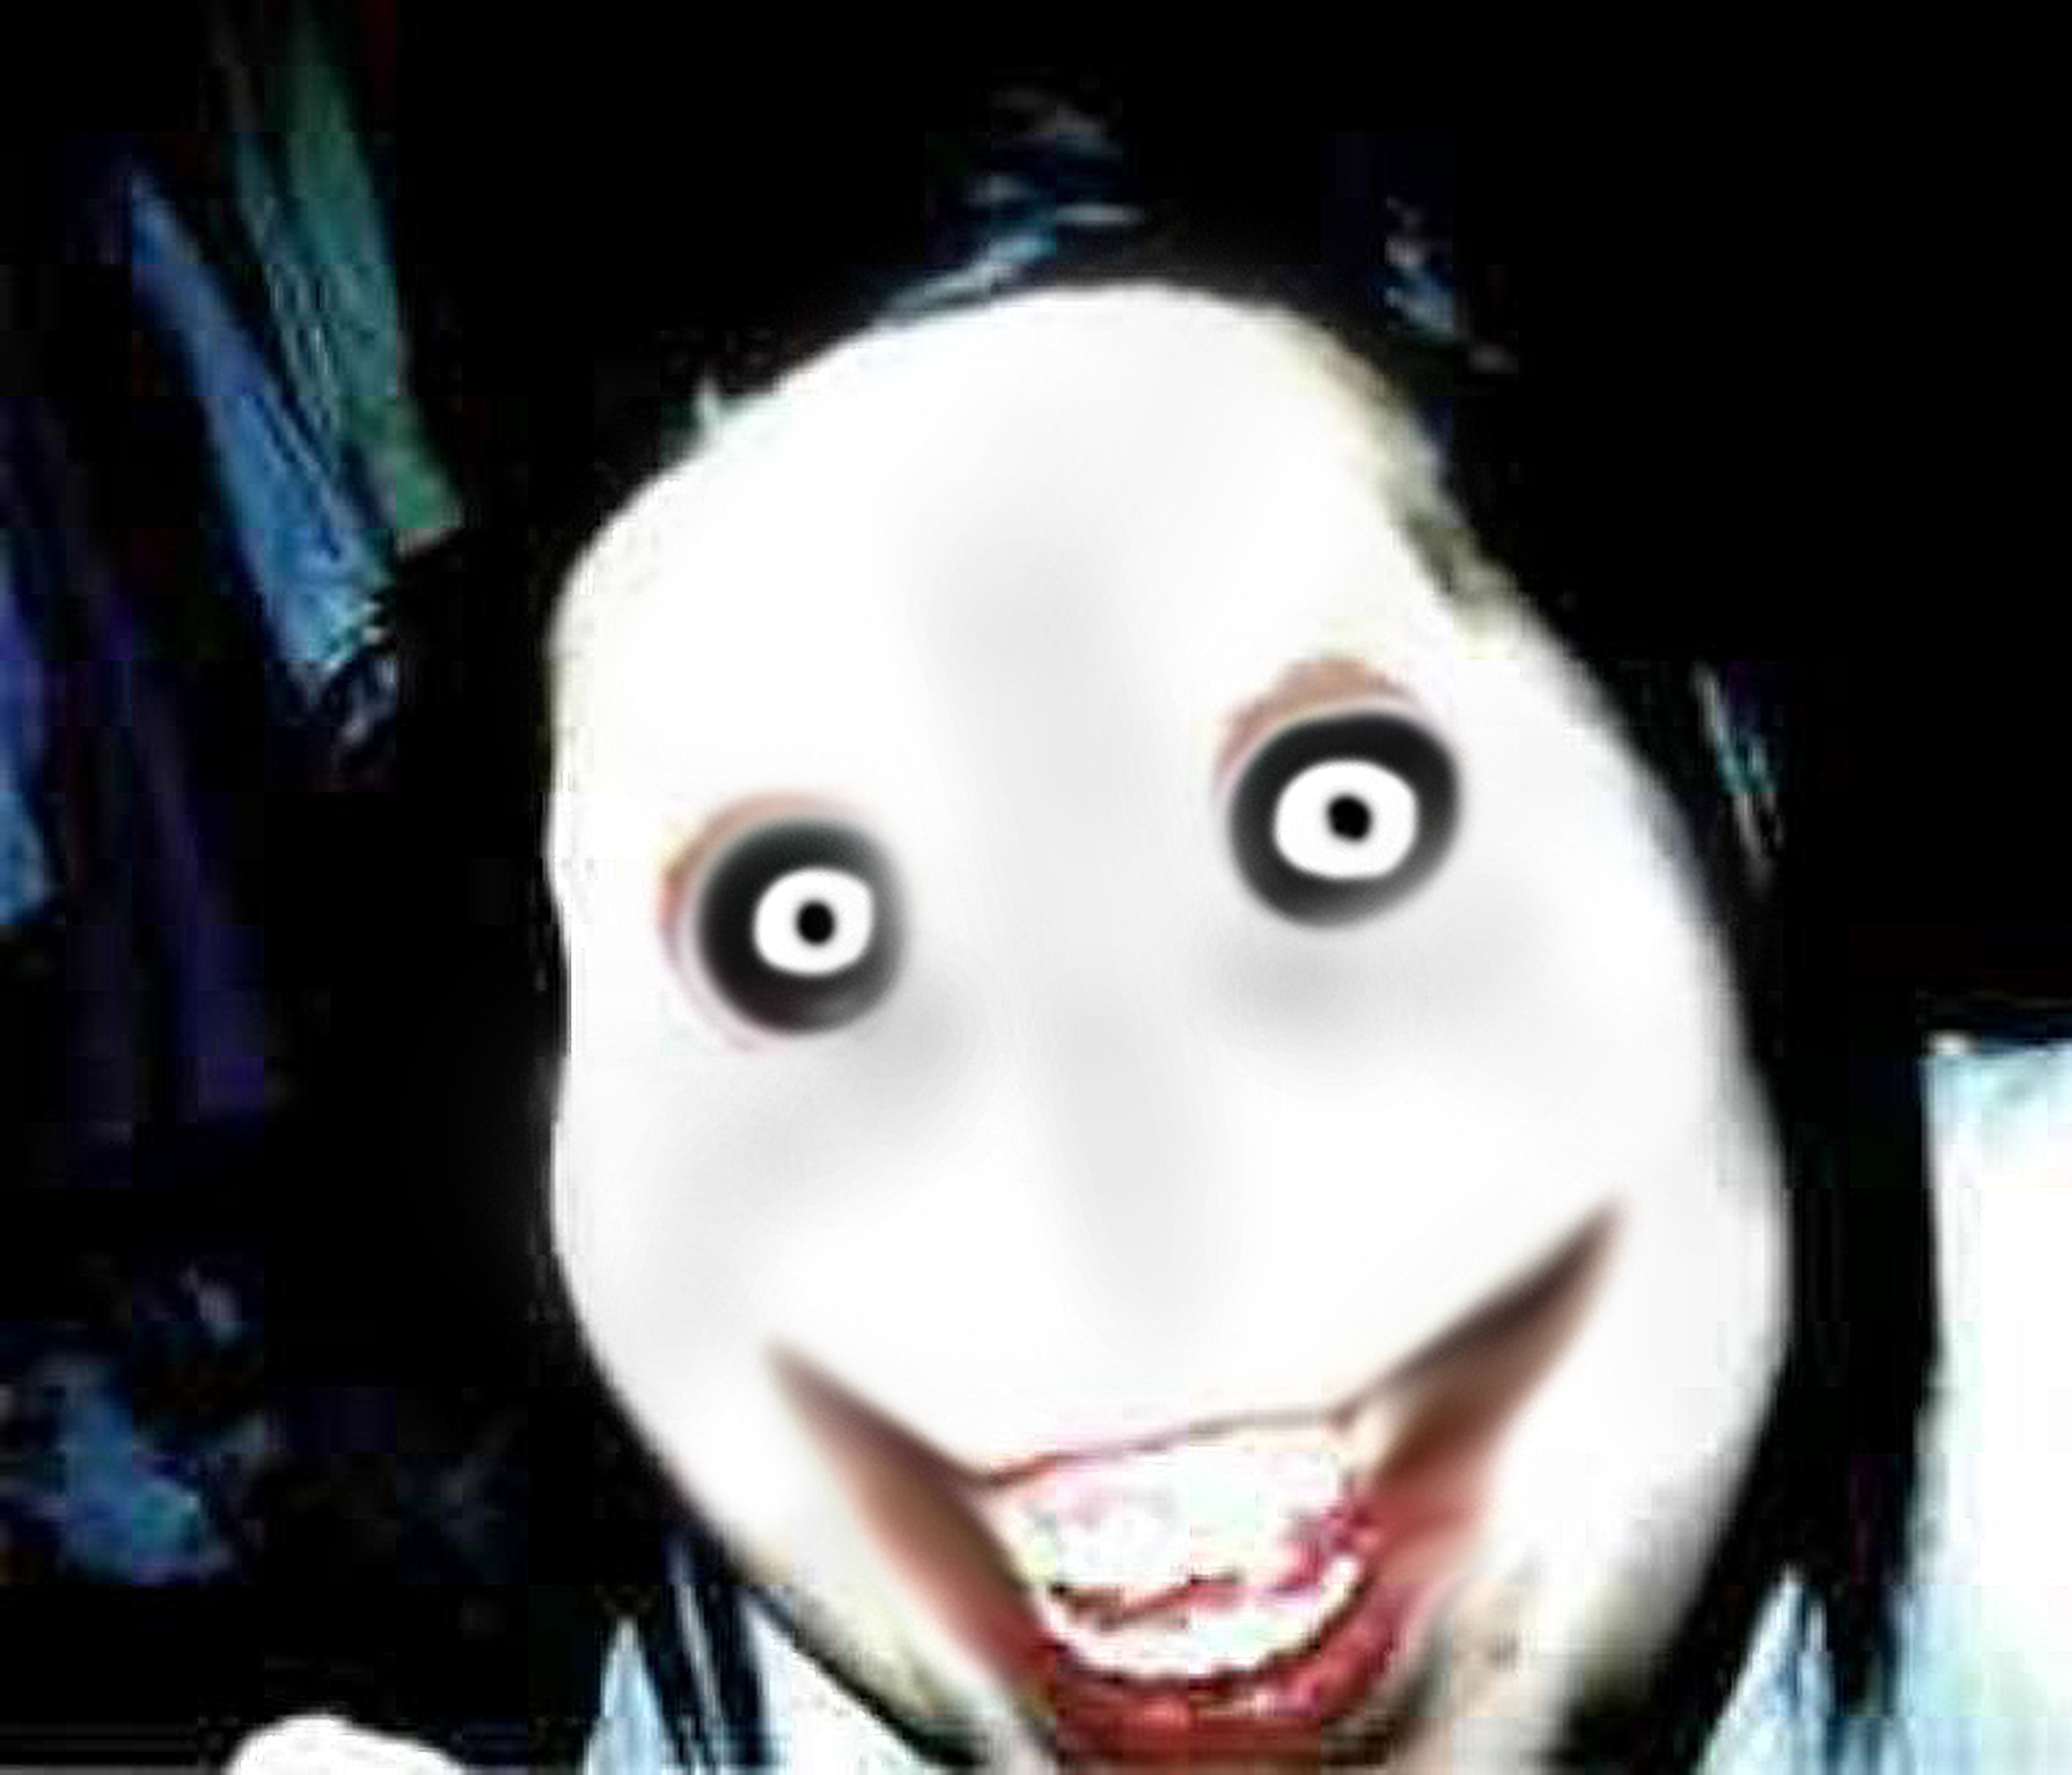 Mysterious and Chilling - Jeff The Killer